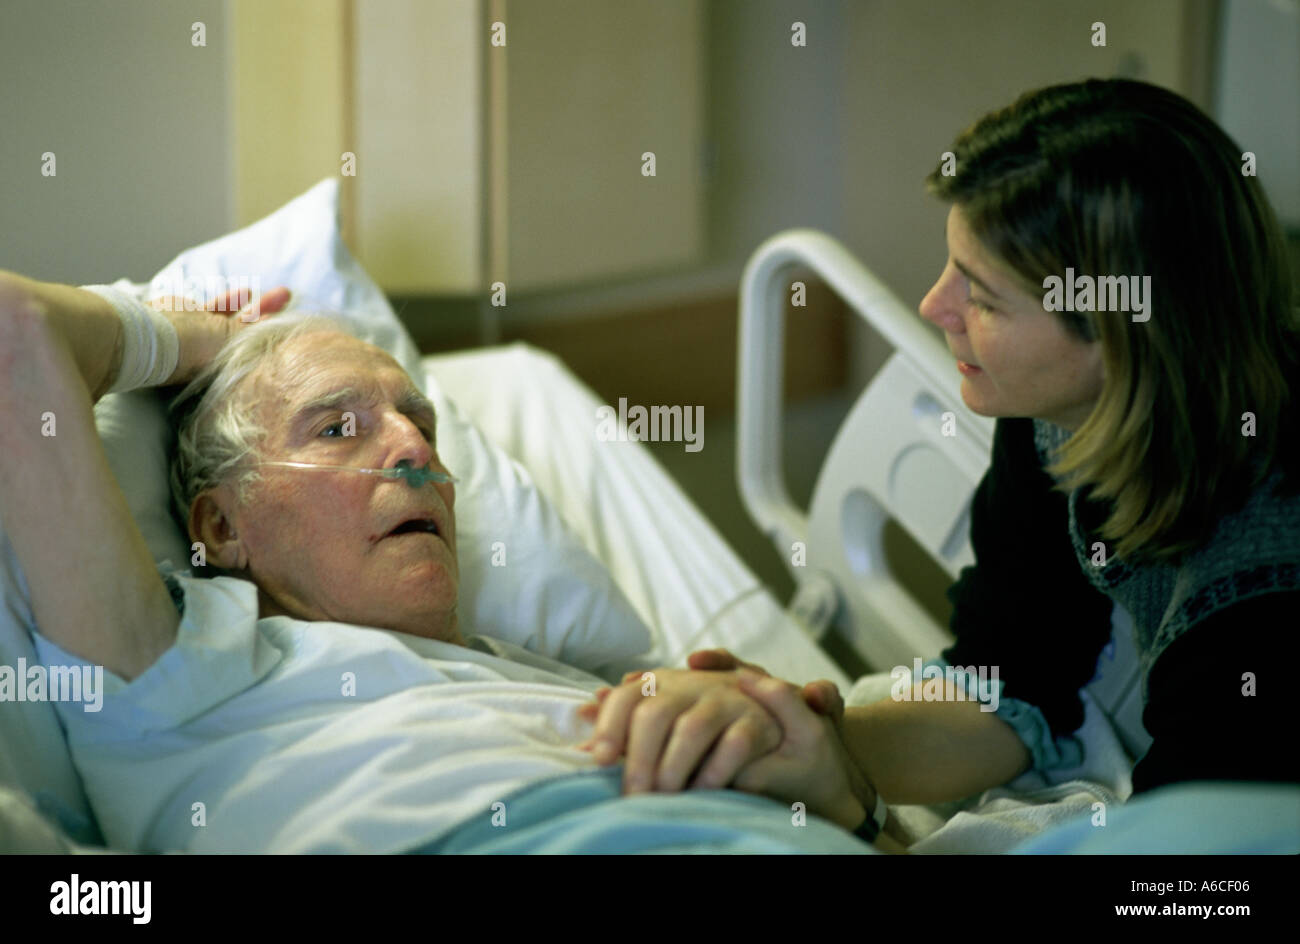 daughter comforting her sick father in a hospital room Stock Photo